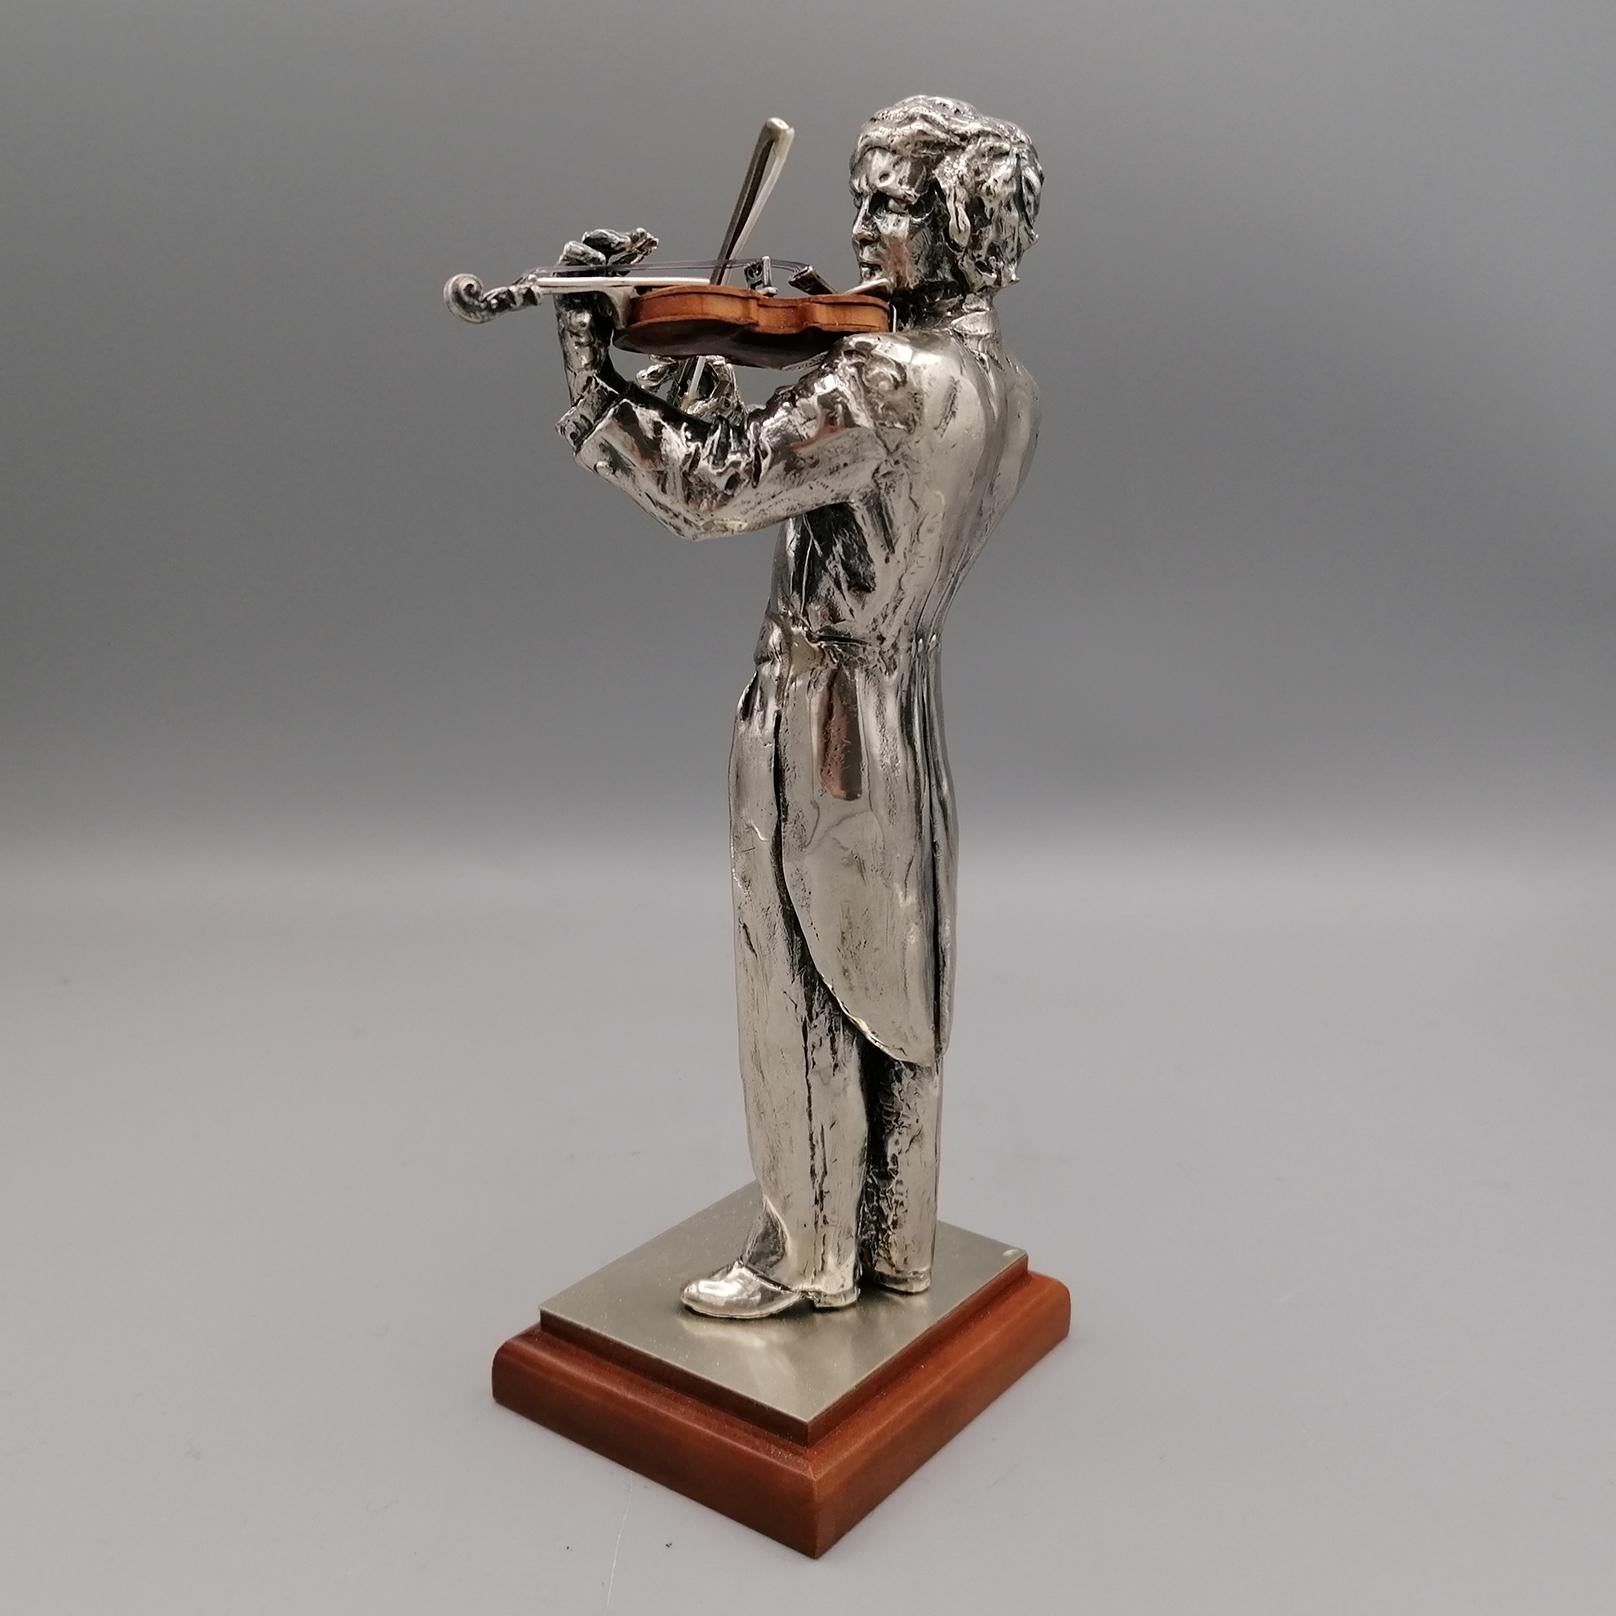 2oth Century Italian Solid Silver Violinist statue with wooden violin In Excellent Condition For Sale In VALENZA, IT